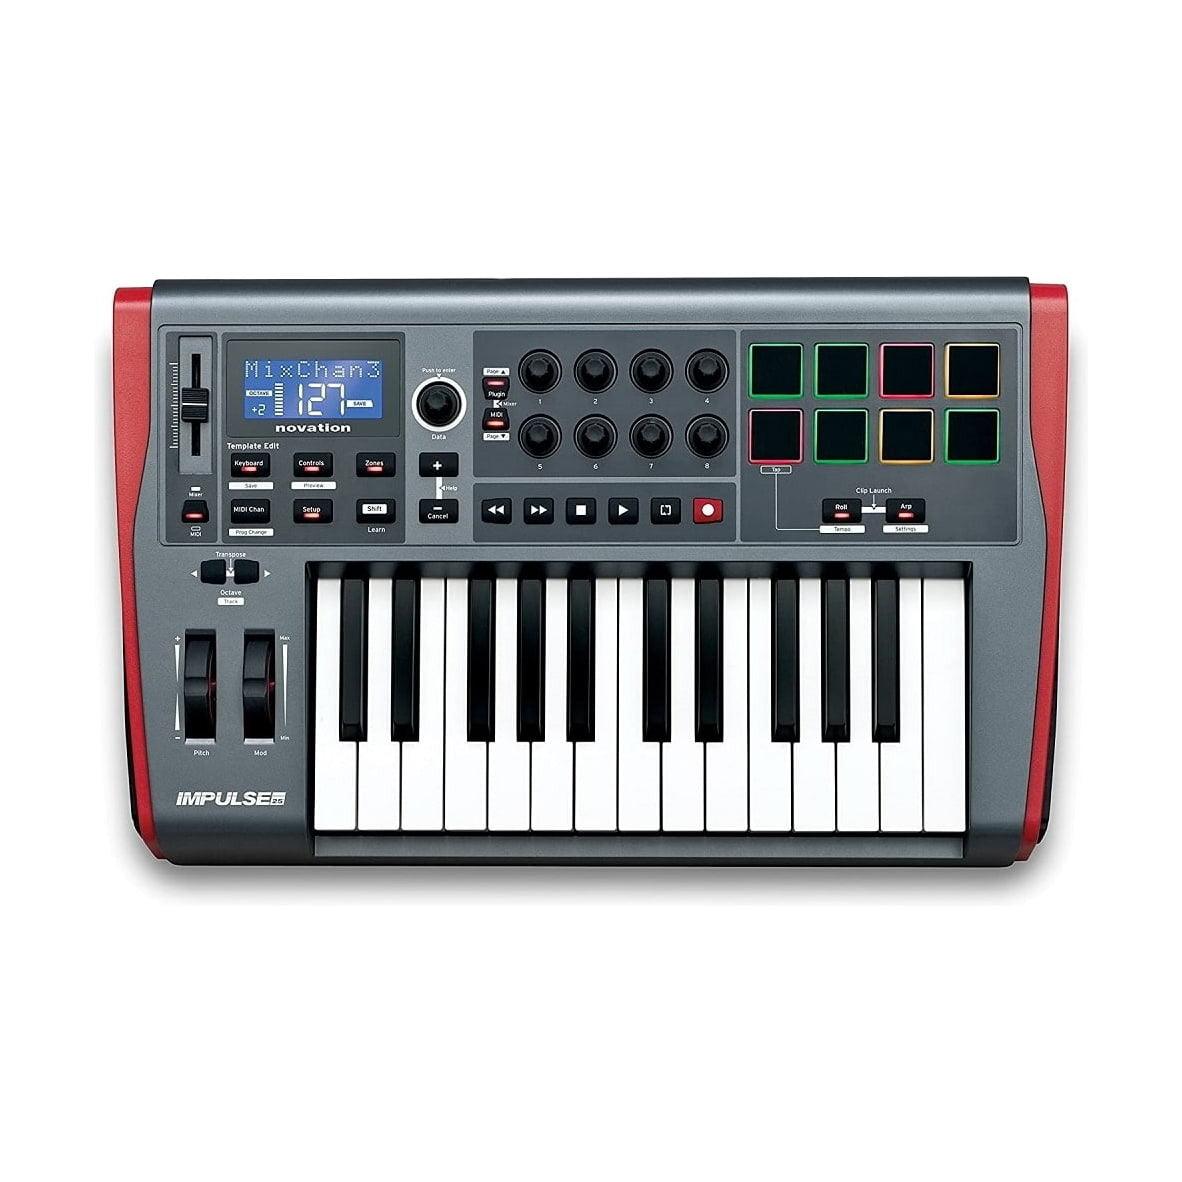 Novation Impulse 25 - 25 Key MIDI Controller Keyboard with 8 Velocity Sensitive Pads and Automap Support - Keyboards - Synthesizers by Novation at Muso's Stuff